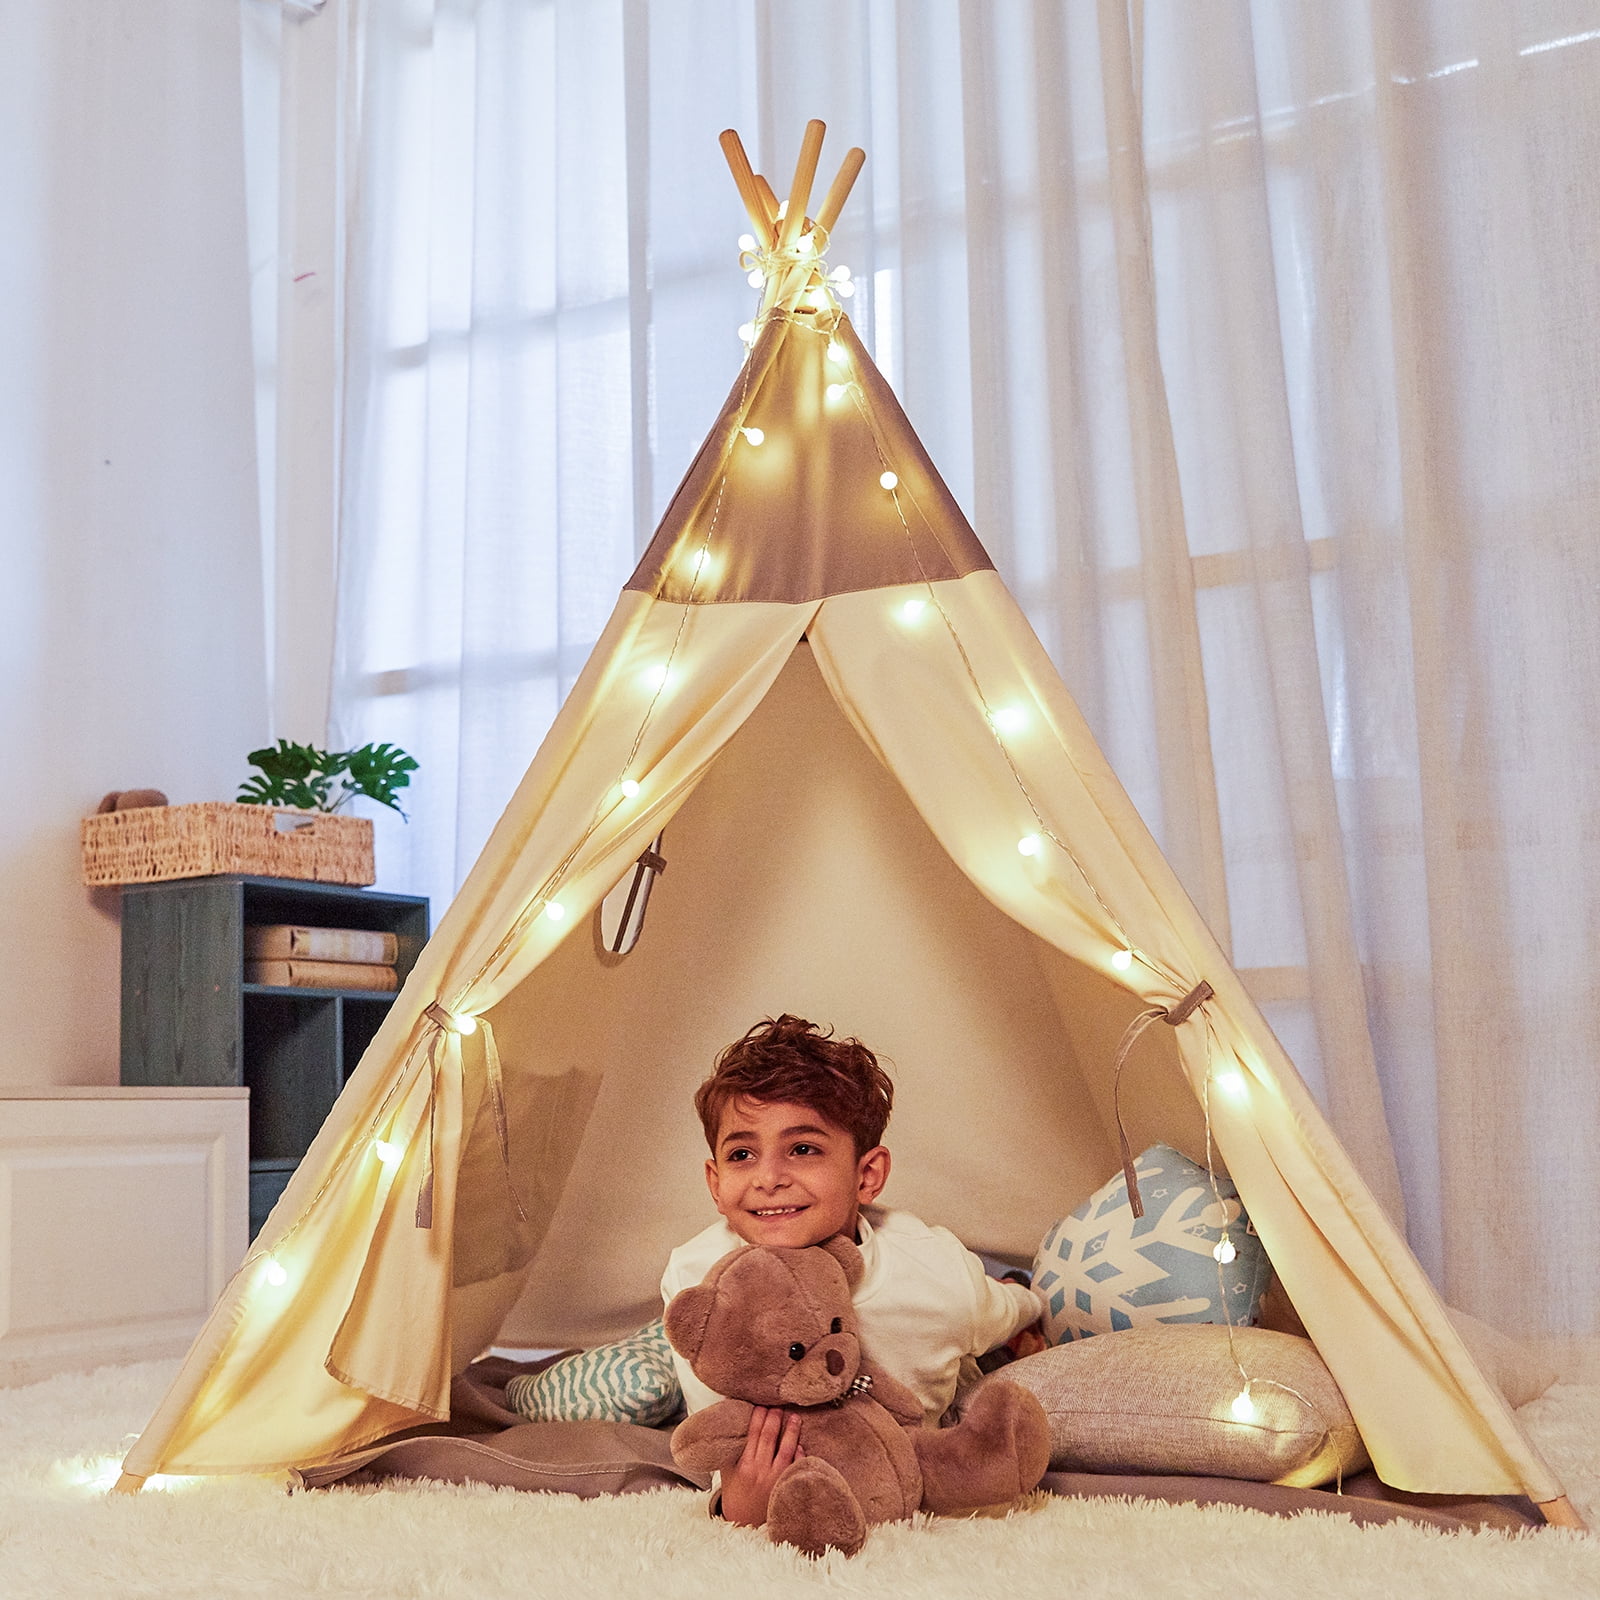 Large Teepee Play Tent Cotton Canvas Children Kids Toy Indoor Outdoor Play House 